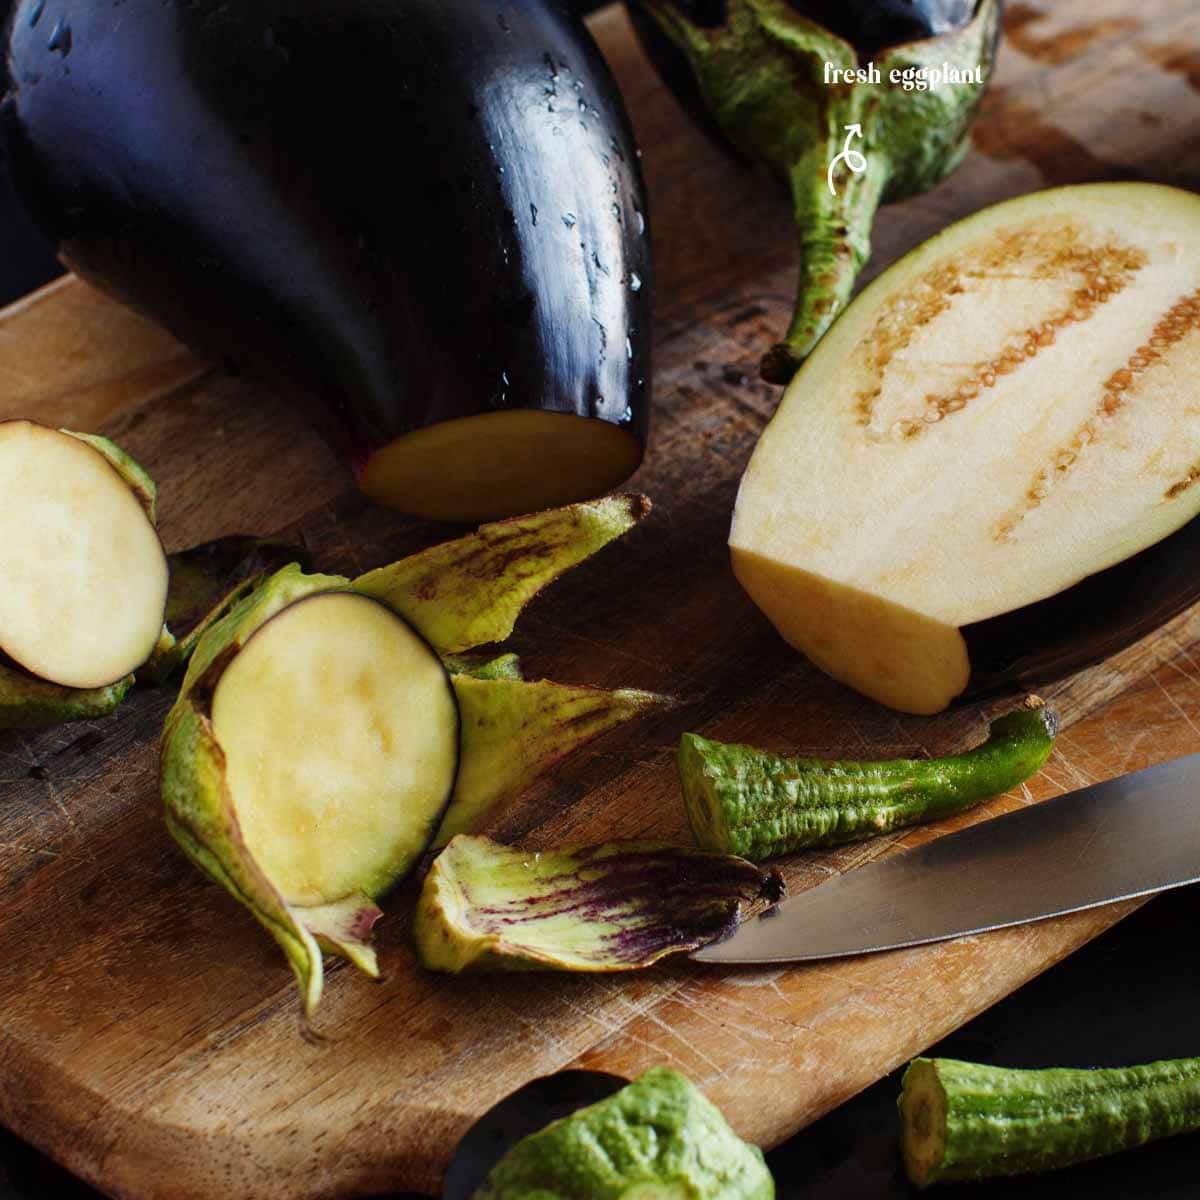 Fresh eggplant can be kept at room temperature for between three to five days. If you refrigerate it, you can keep it for somewhere from seven to ten days.